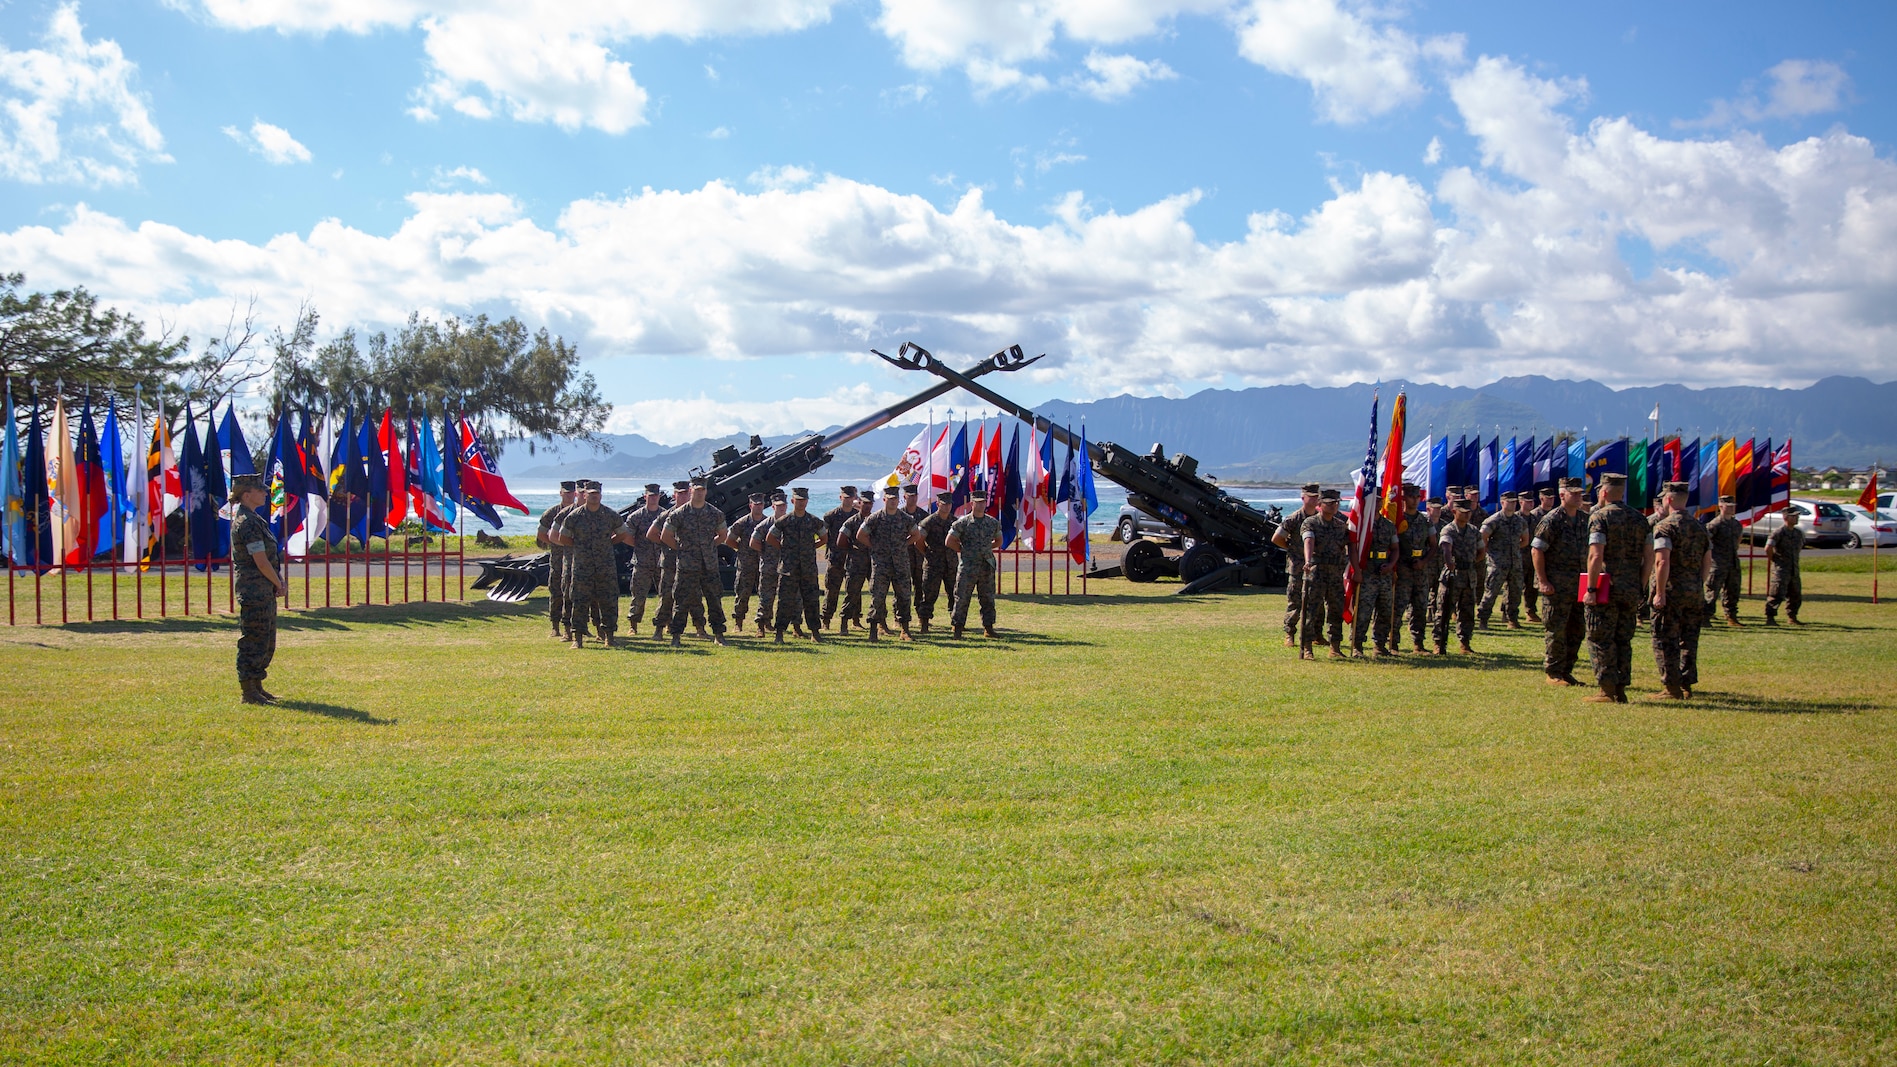 U.S. Marines with 1st Battalion, 12th Marine Regiment conduct a retirement ceremony for Maj. Dennis Nichols on Marine Corps Base Hawaii, Mar. 11, 2020. Maj. Nichols retired after 28 years of honorable service. (U.S. Marine Corps photo by Cpl. Eric Tso)